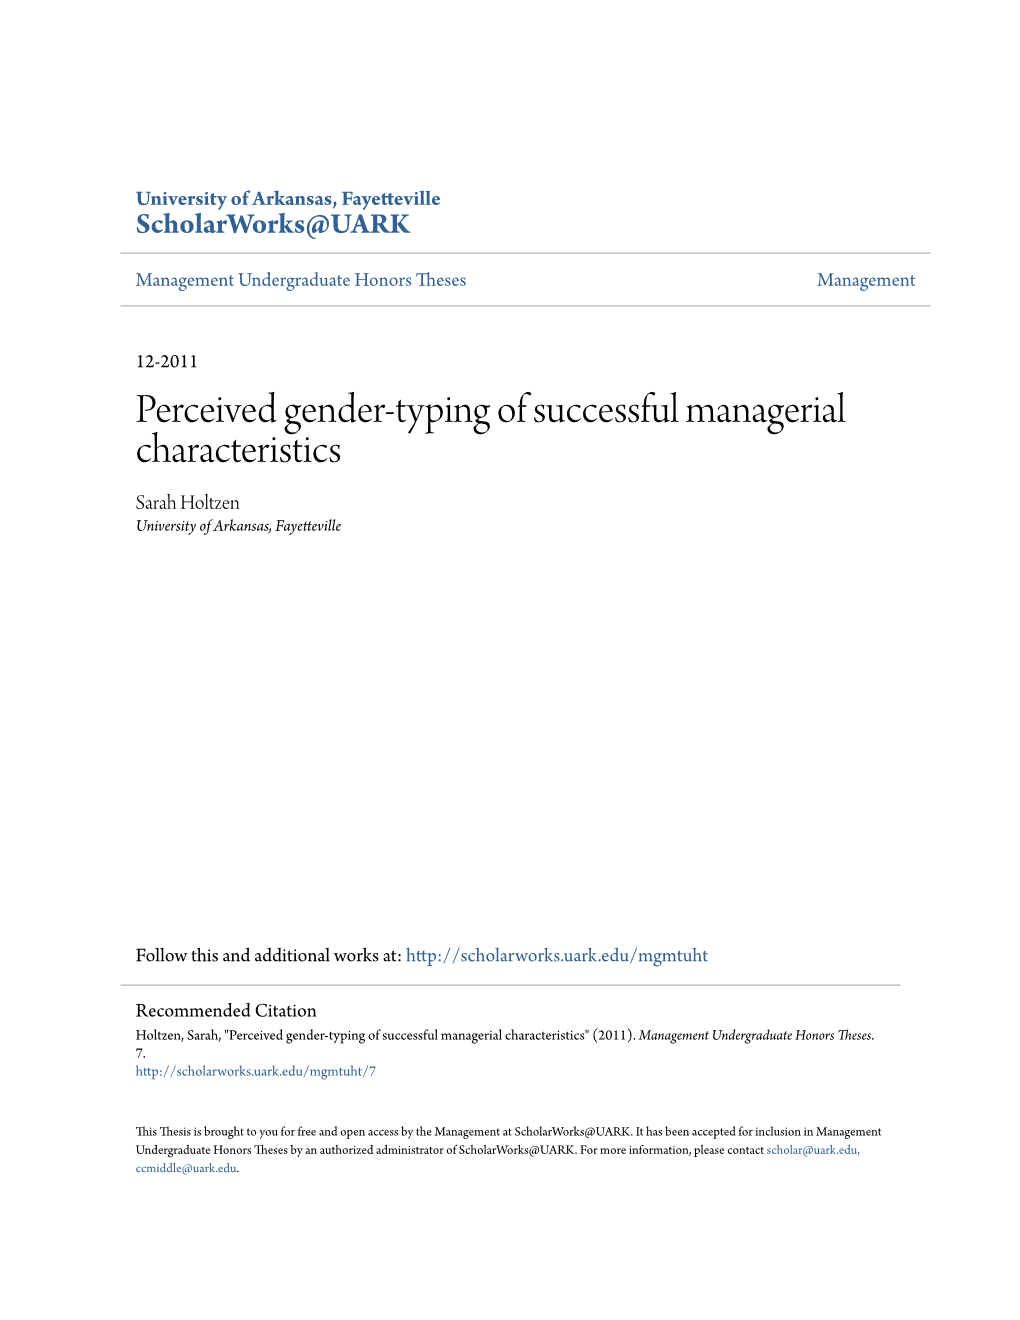 Perceived Gender-Typing of Successful Managerial Characteristics Sarah Holtzen University of Arkansas, Fayetteville